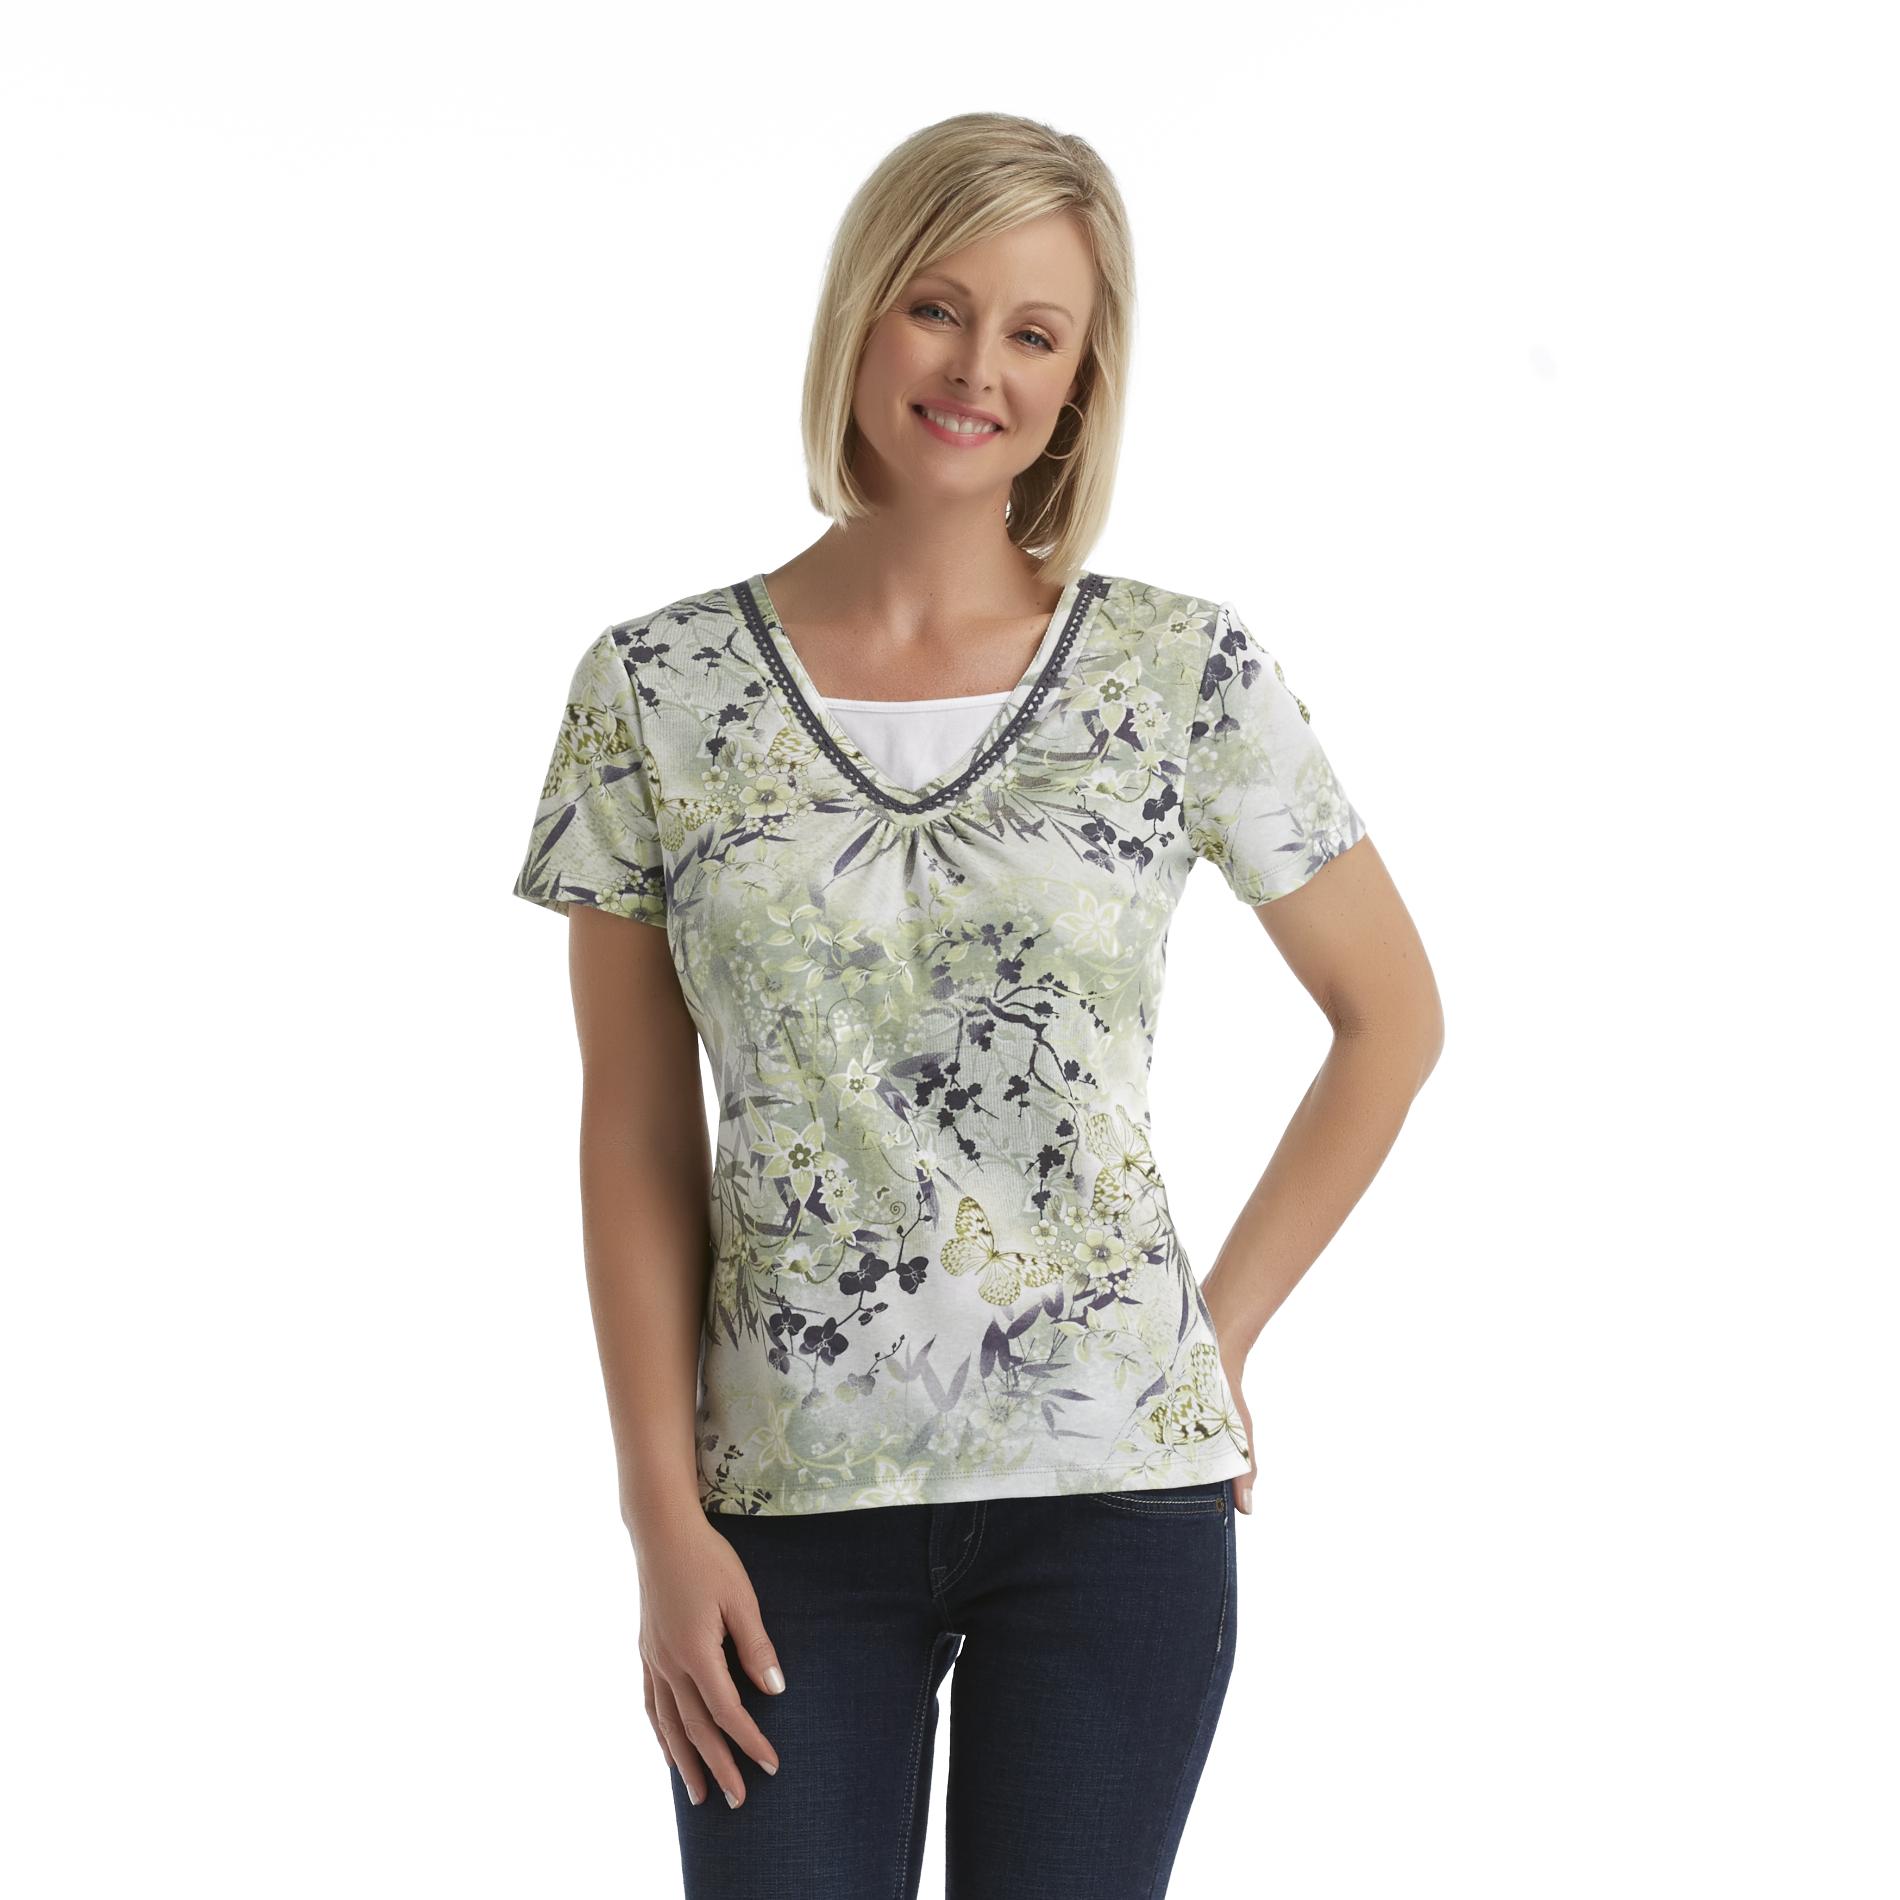 Basic Editions Women's Layered-Look V-Neck T-Shirt - Floral Butterfly